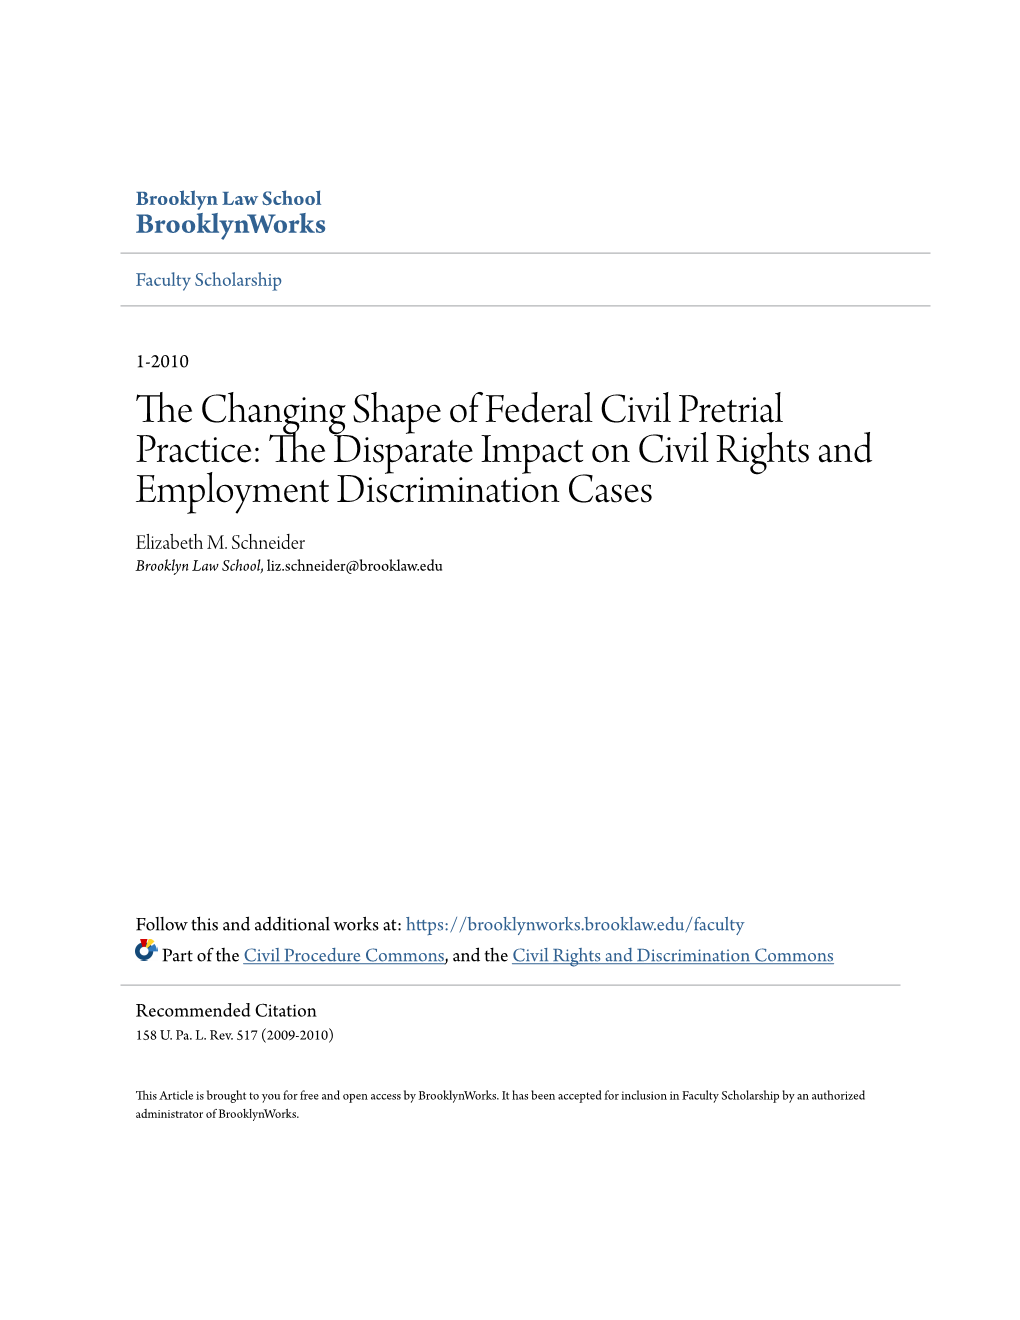 The Changing Shape of Federal Civil Pretrial Practice: the Disparate Impact on Civil Rights and Employment Discrimination Cases